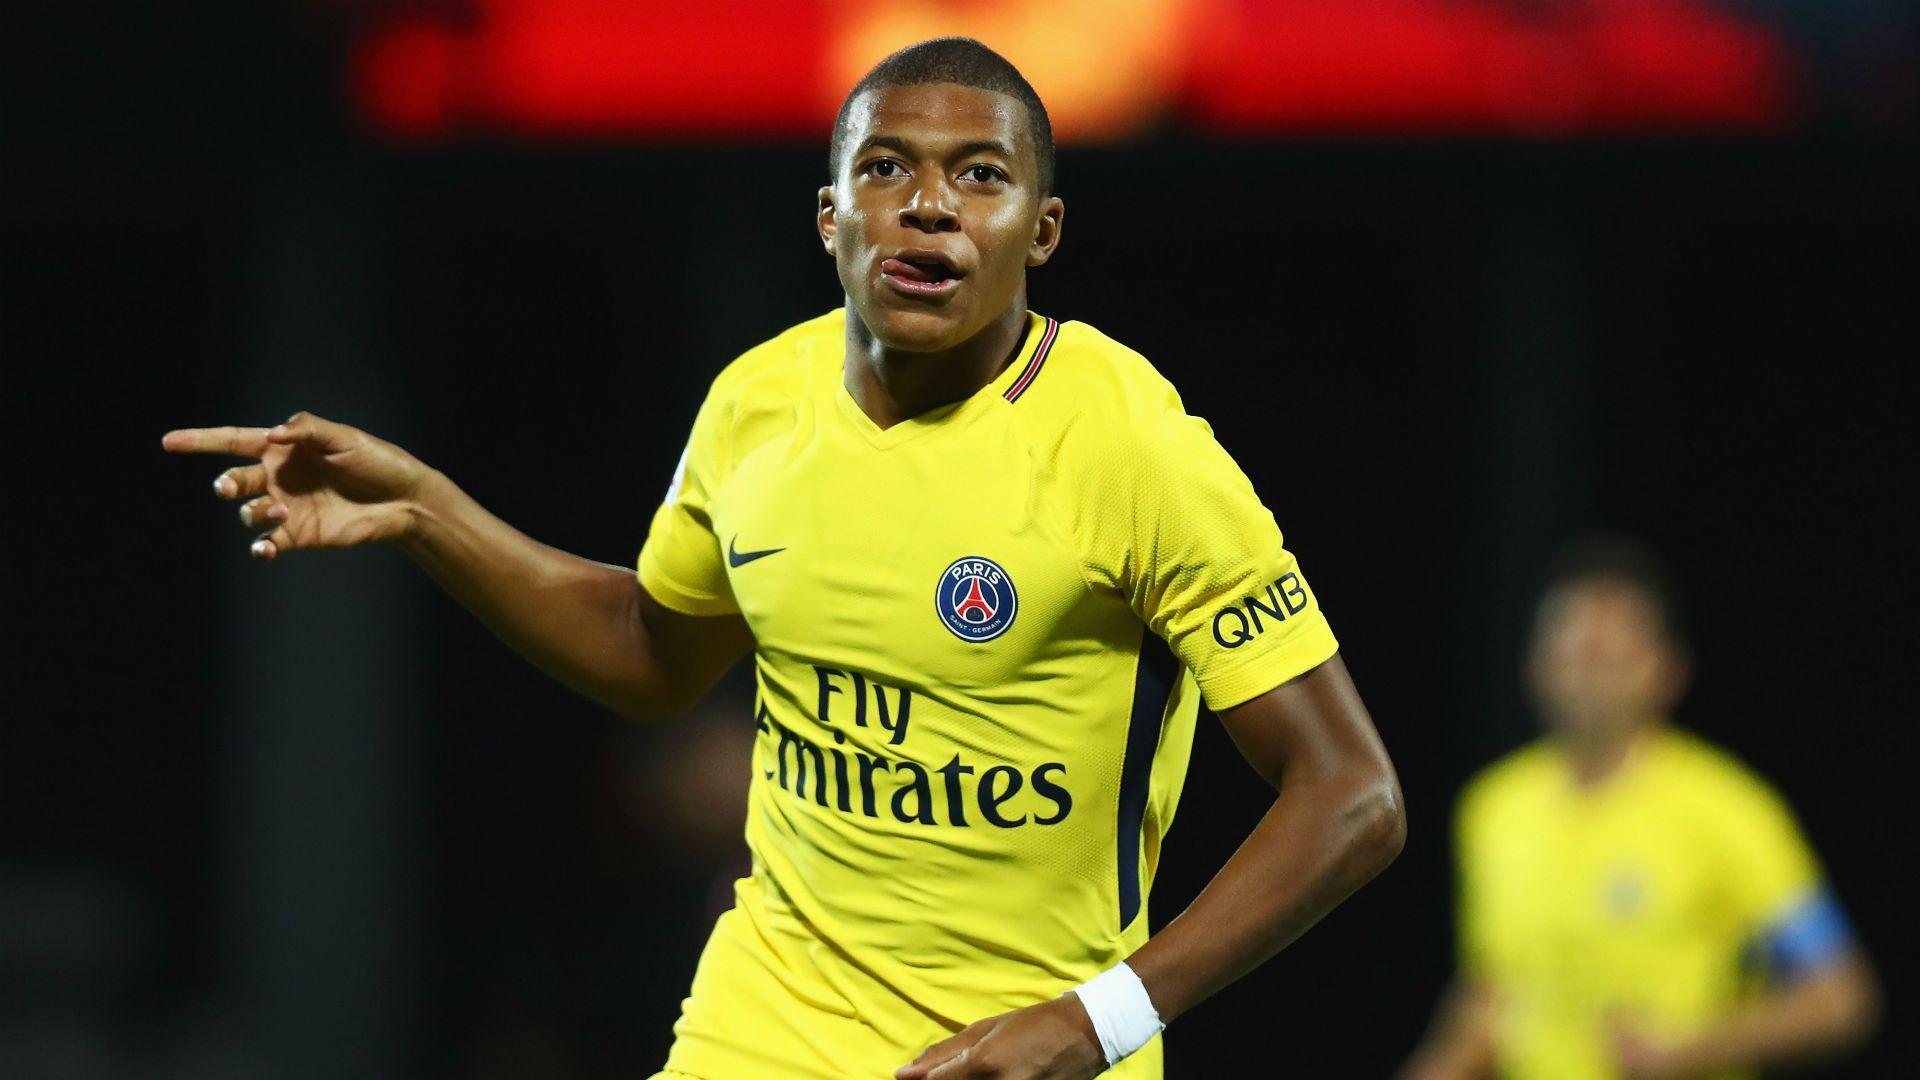 Kylian Mbappe HD Image, Wallpaper and Photo Free 2